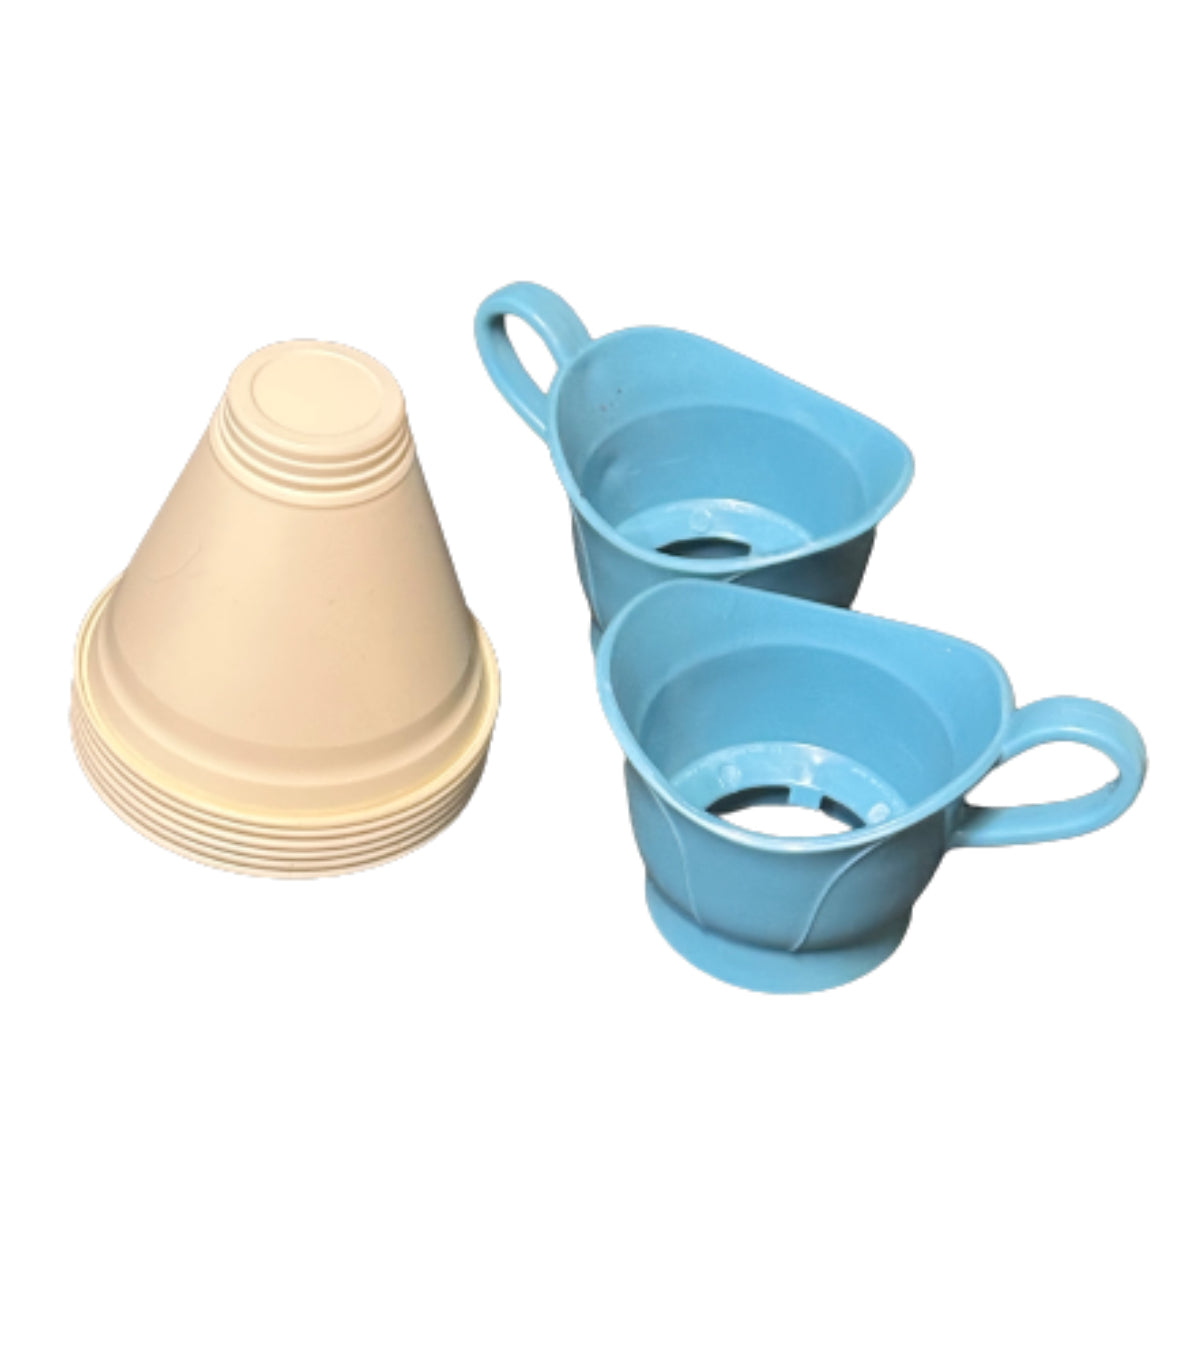 MAD MEN: Donald and Draper's Vintage Solo Cozy Coffee Cups & Lily Filters